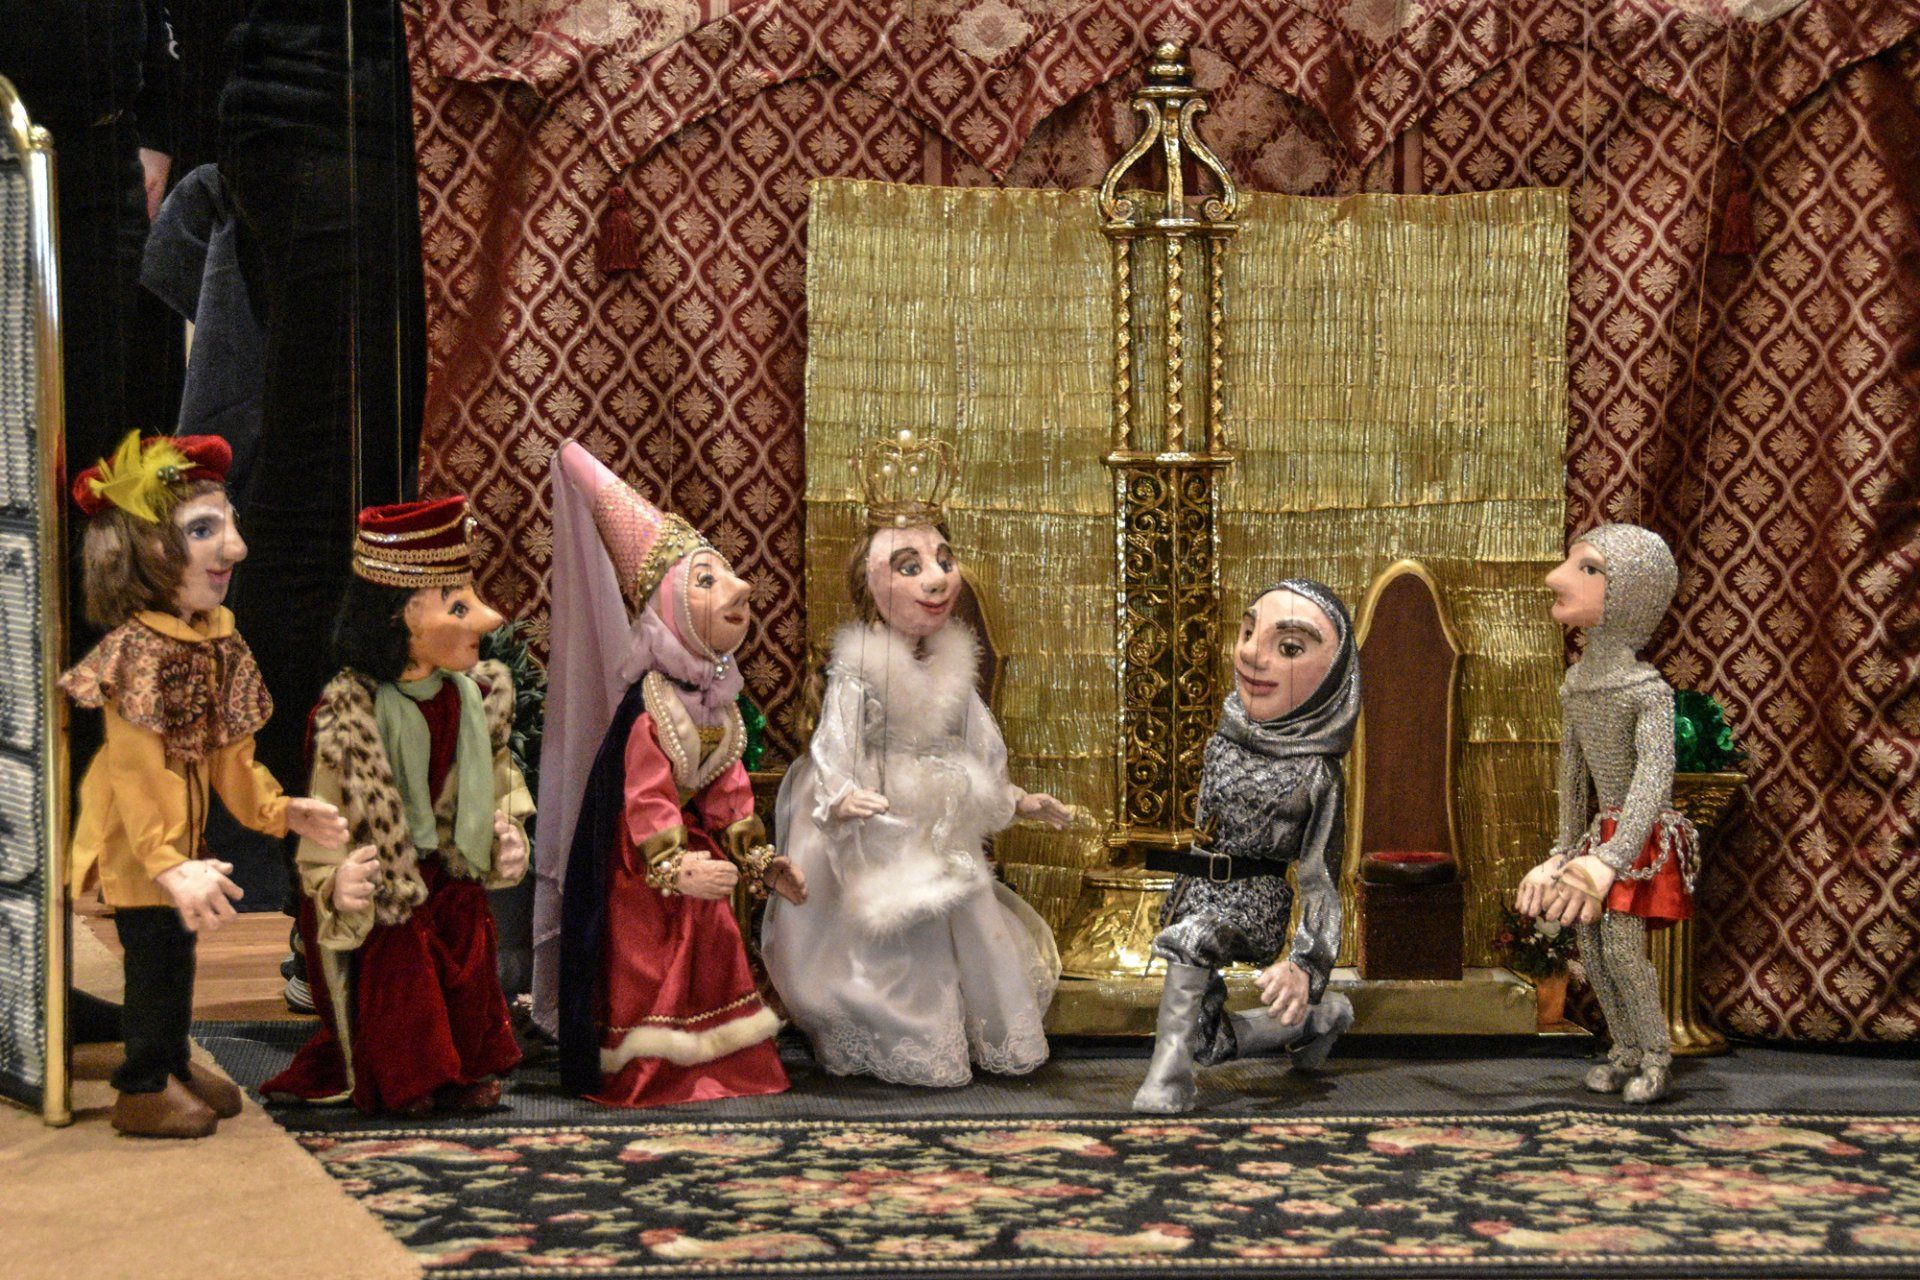 Six fairytale marionettes in the queen's throneroom